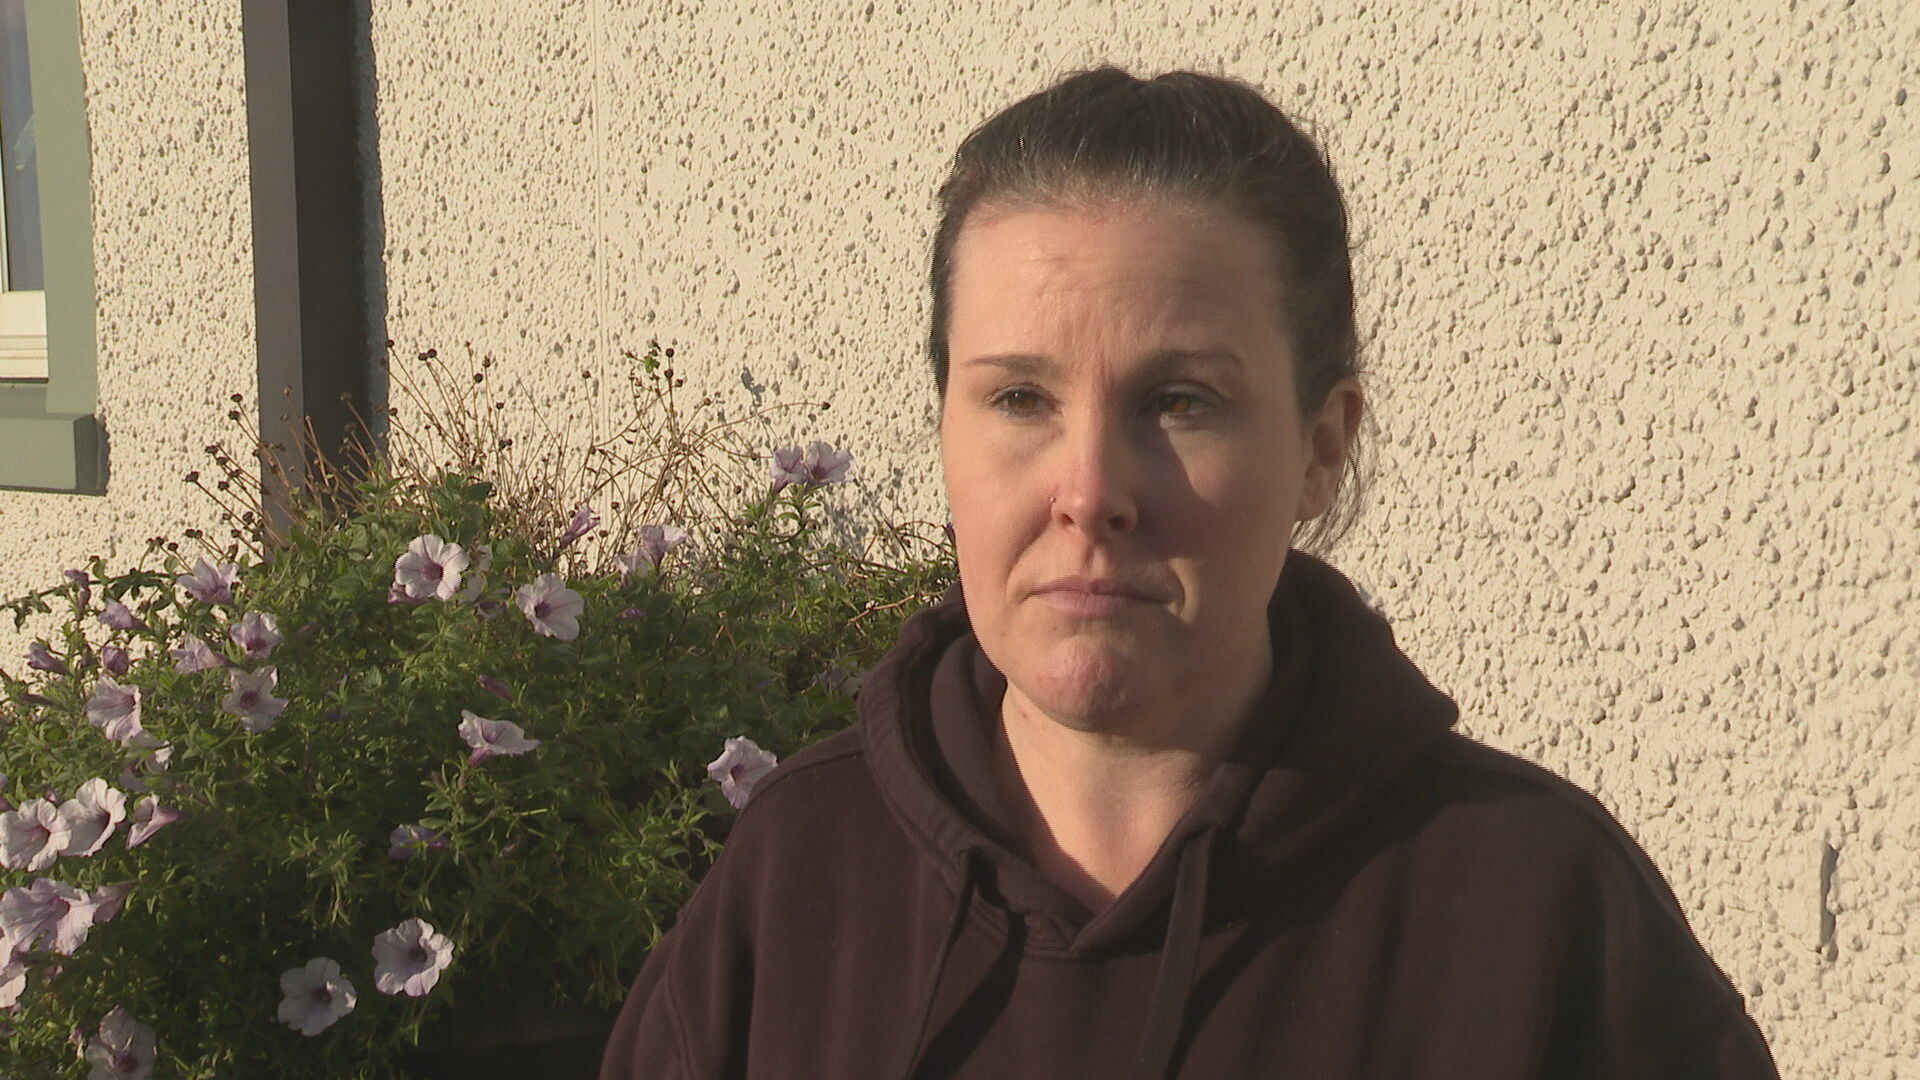 Former postal worker Katie Hill said she would come home from work 'crying and soaking wet'.